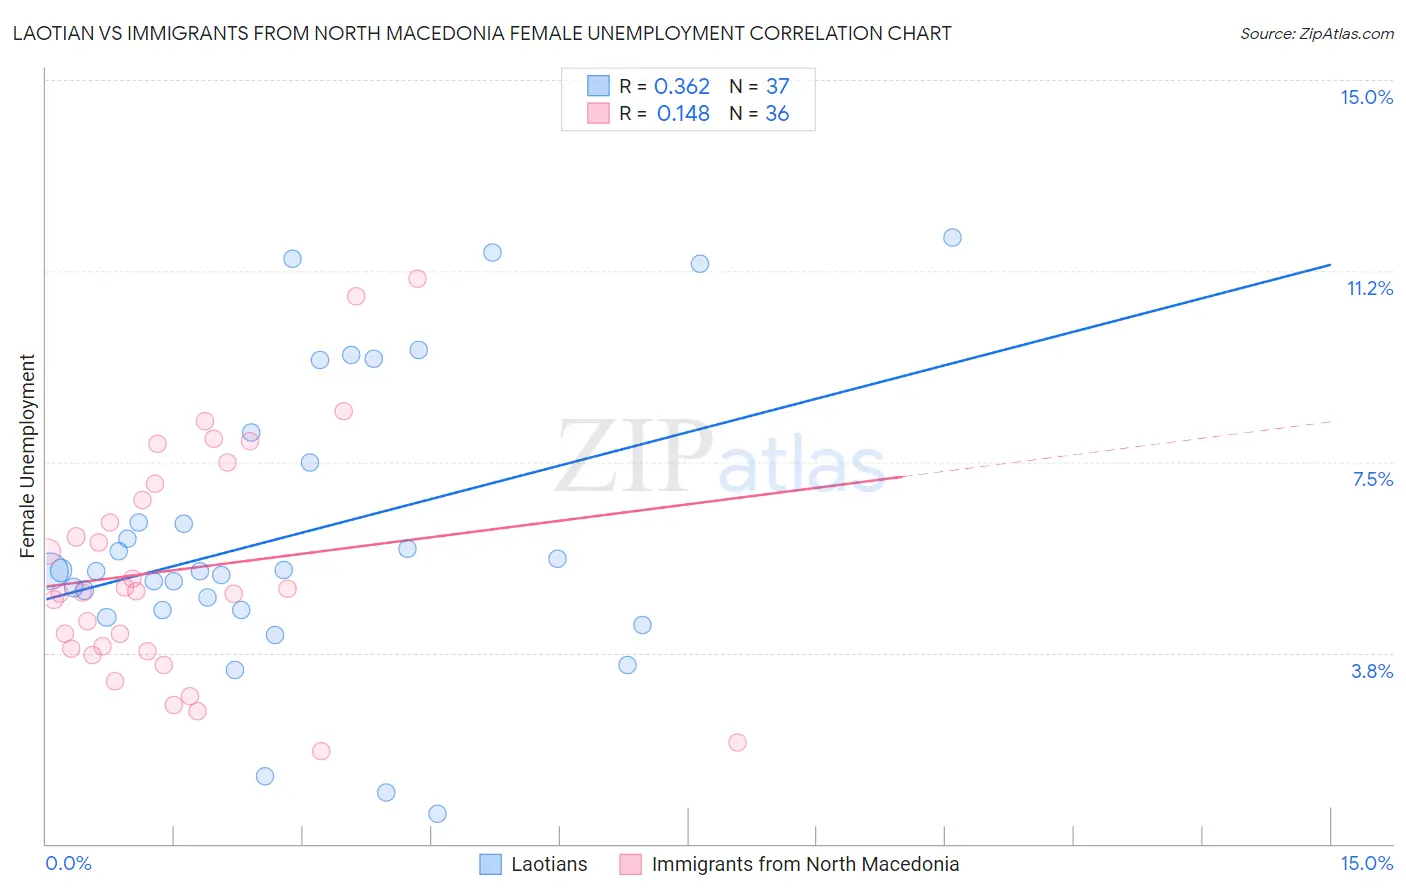 Laotian vs Immigrants from North Macedonia Female Unemployment